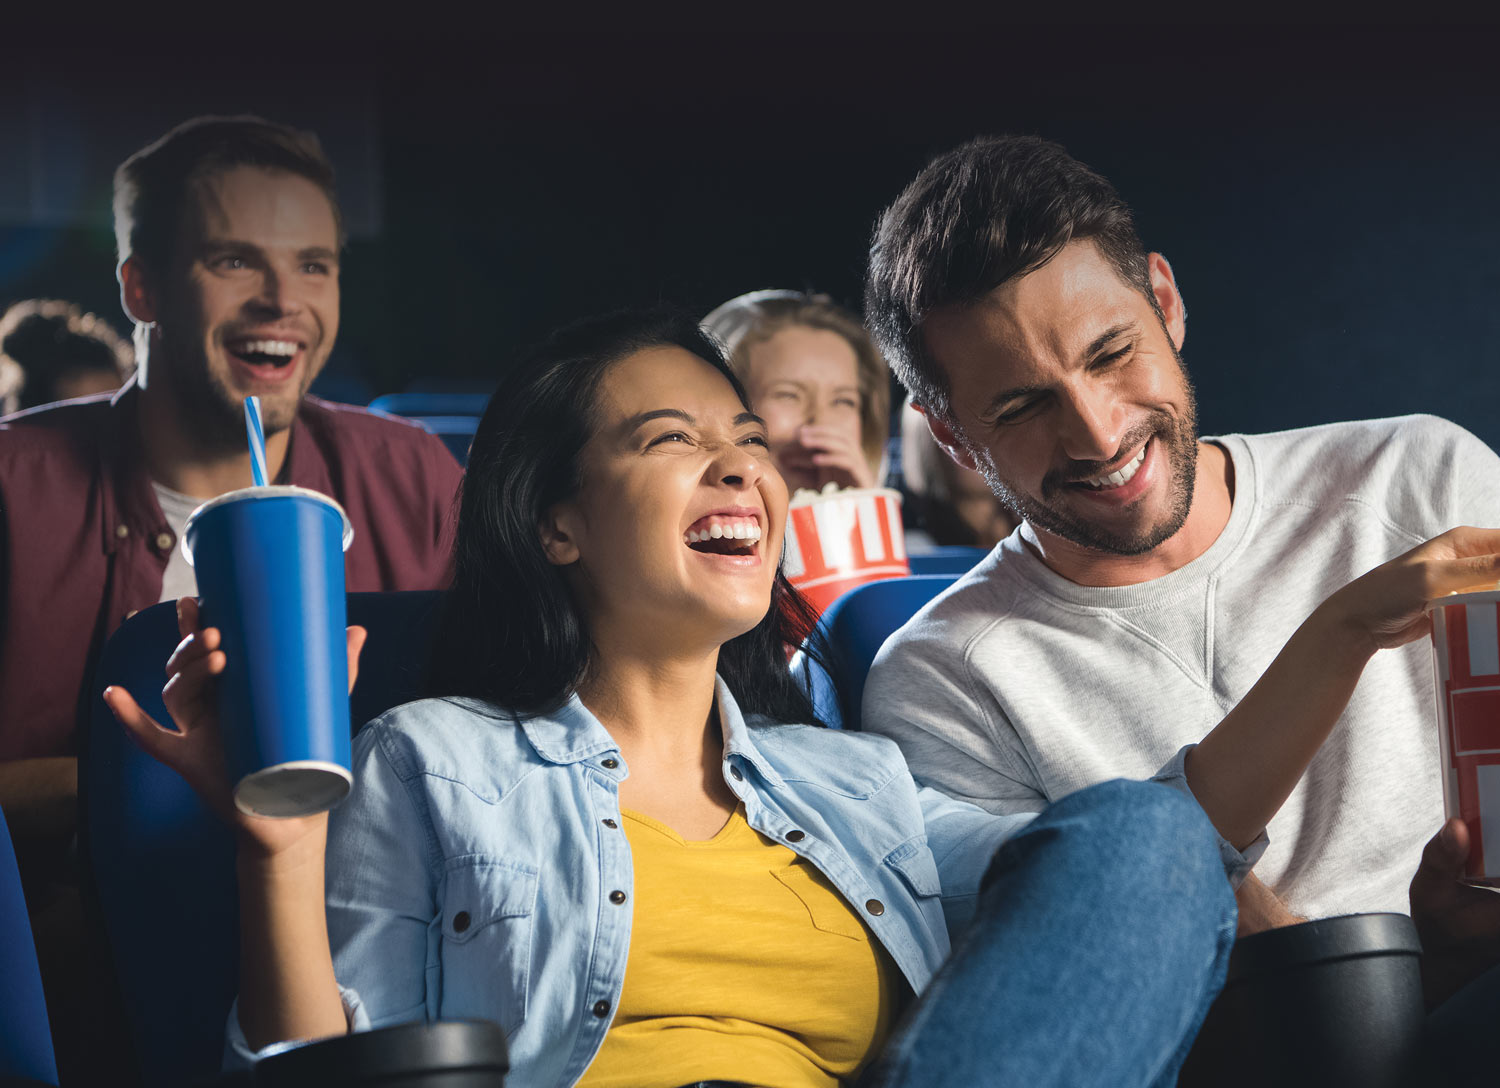 people laughing in a movie theater with popcorn and drinks